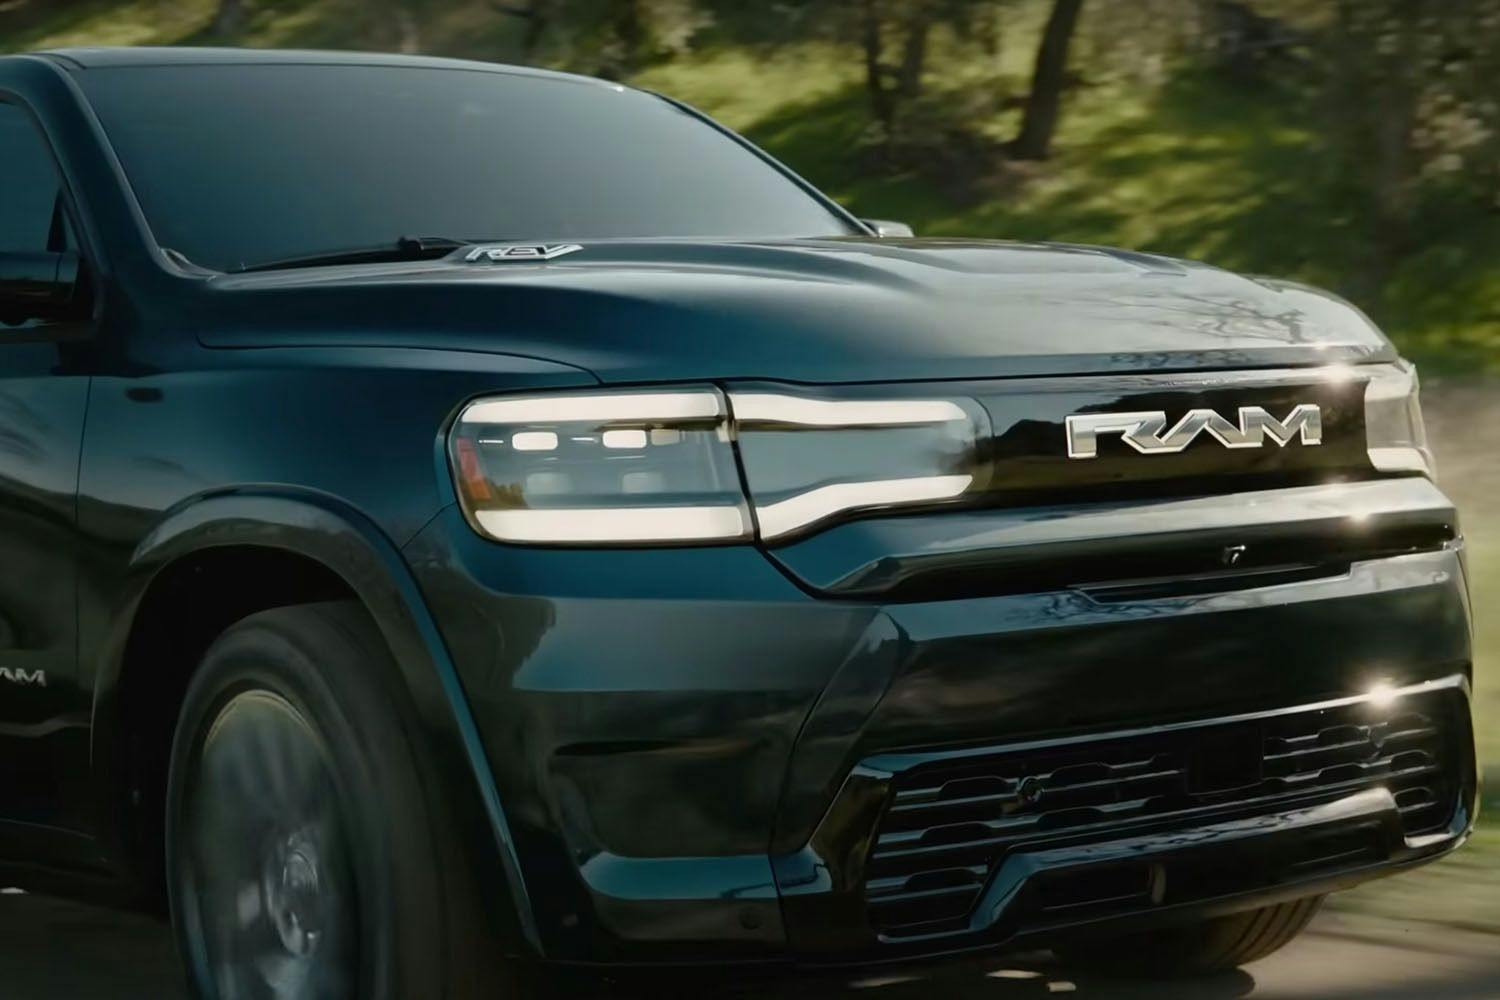 the front grill of a a black Ram 1500 REV drives on a road in a green wooded landscape